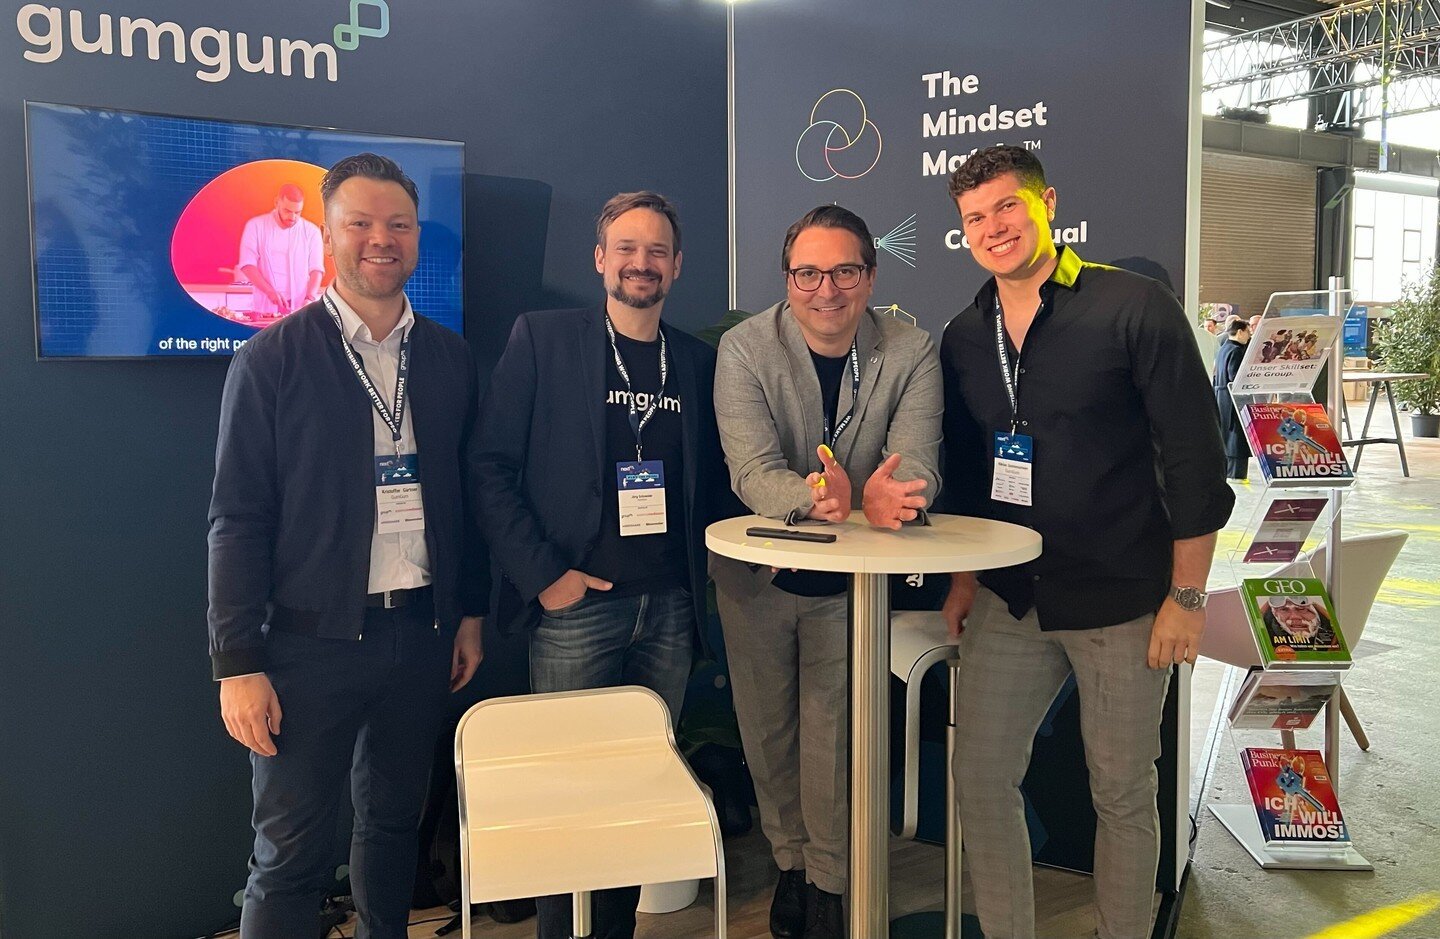 Cheers D&uuml;sseldorf 🍻 Our team had such a great time attending the #NextM Conference this week!

Thank you to everyone who stopped by our booth and caught our panel session with GumGum's own J&ouml;rg Schneider and Essence Mediacom's Claudia Goll